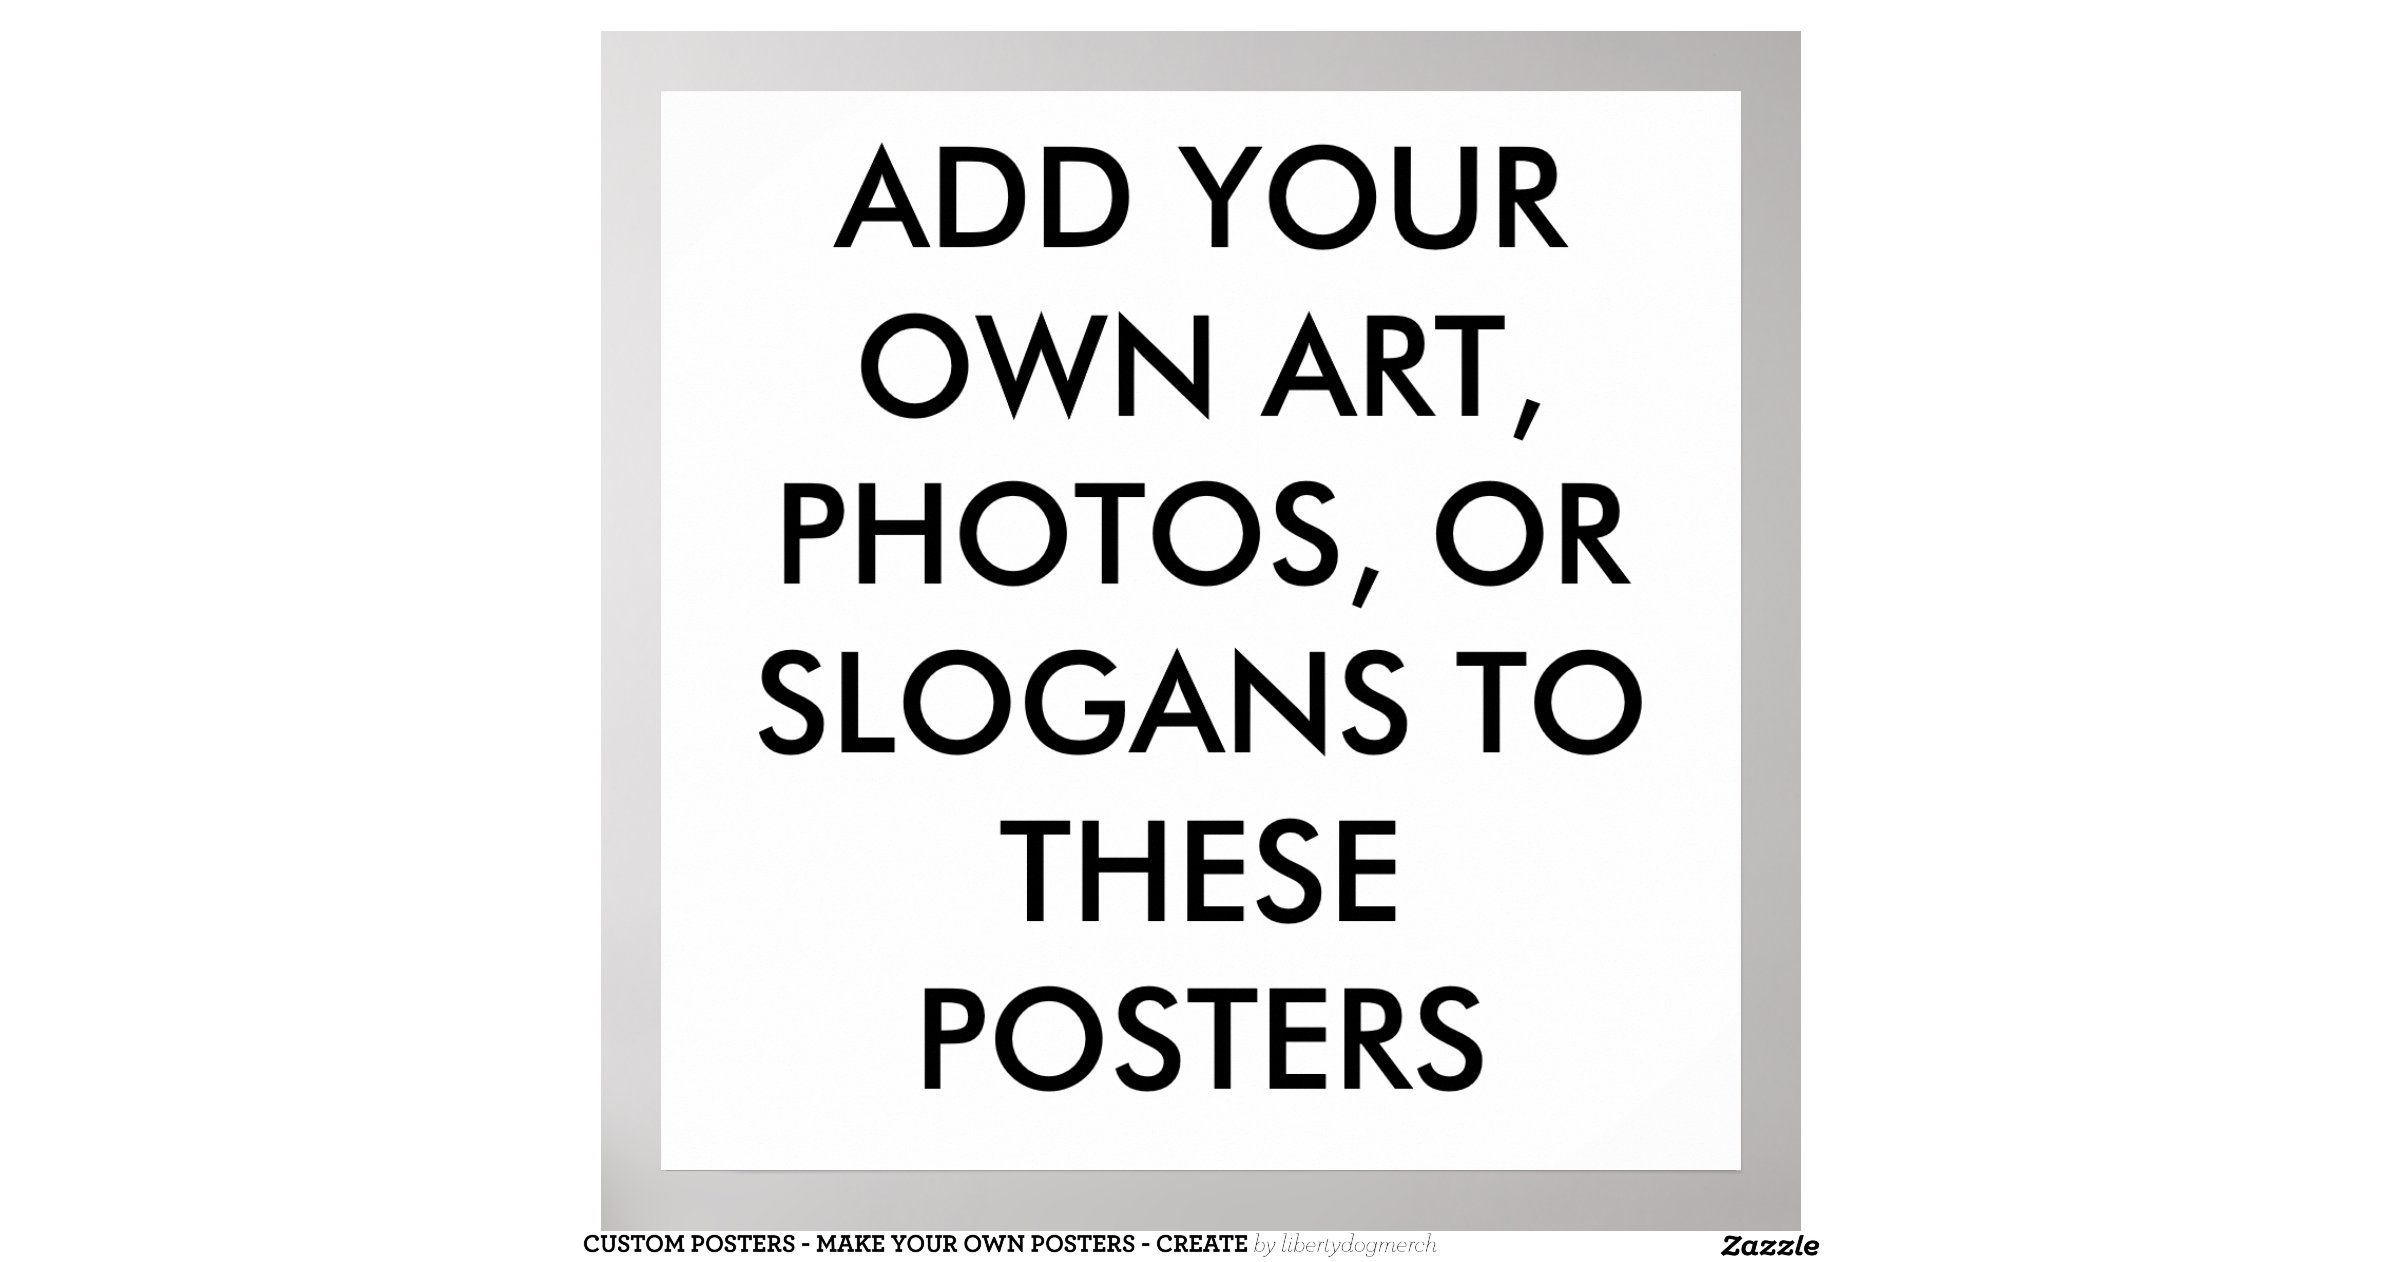 custom_posters_make_your_own_posters_create ...